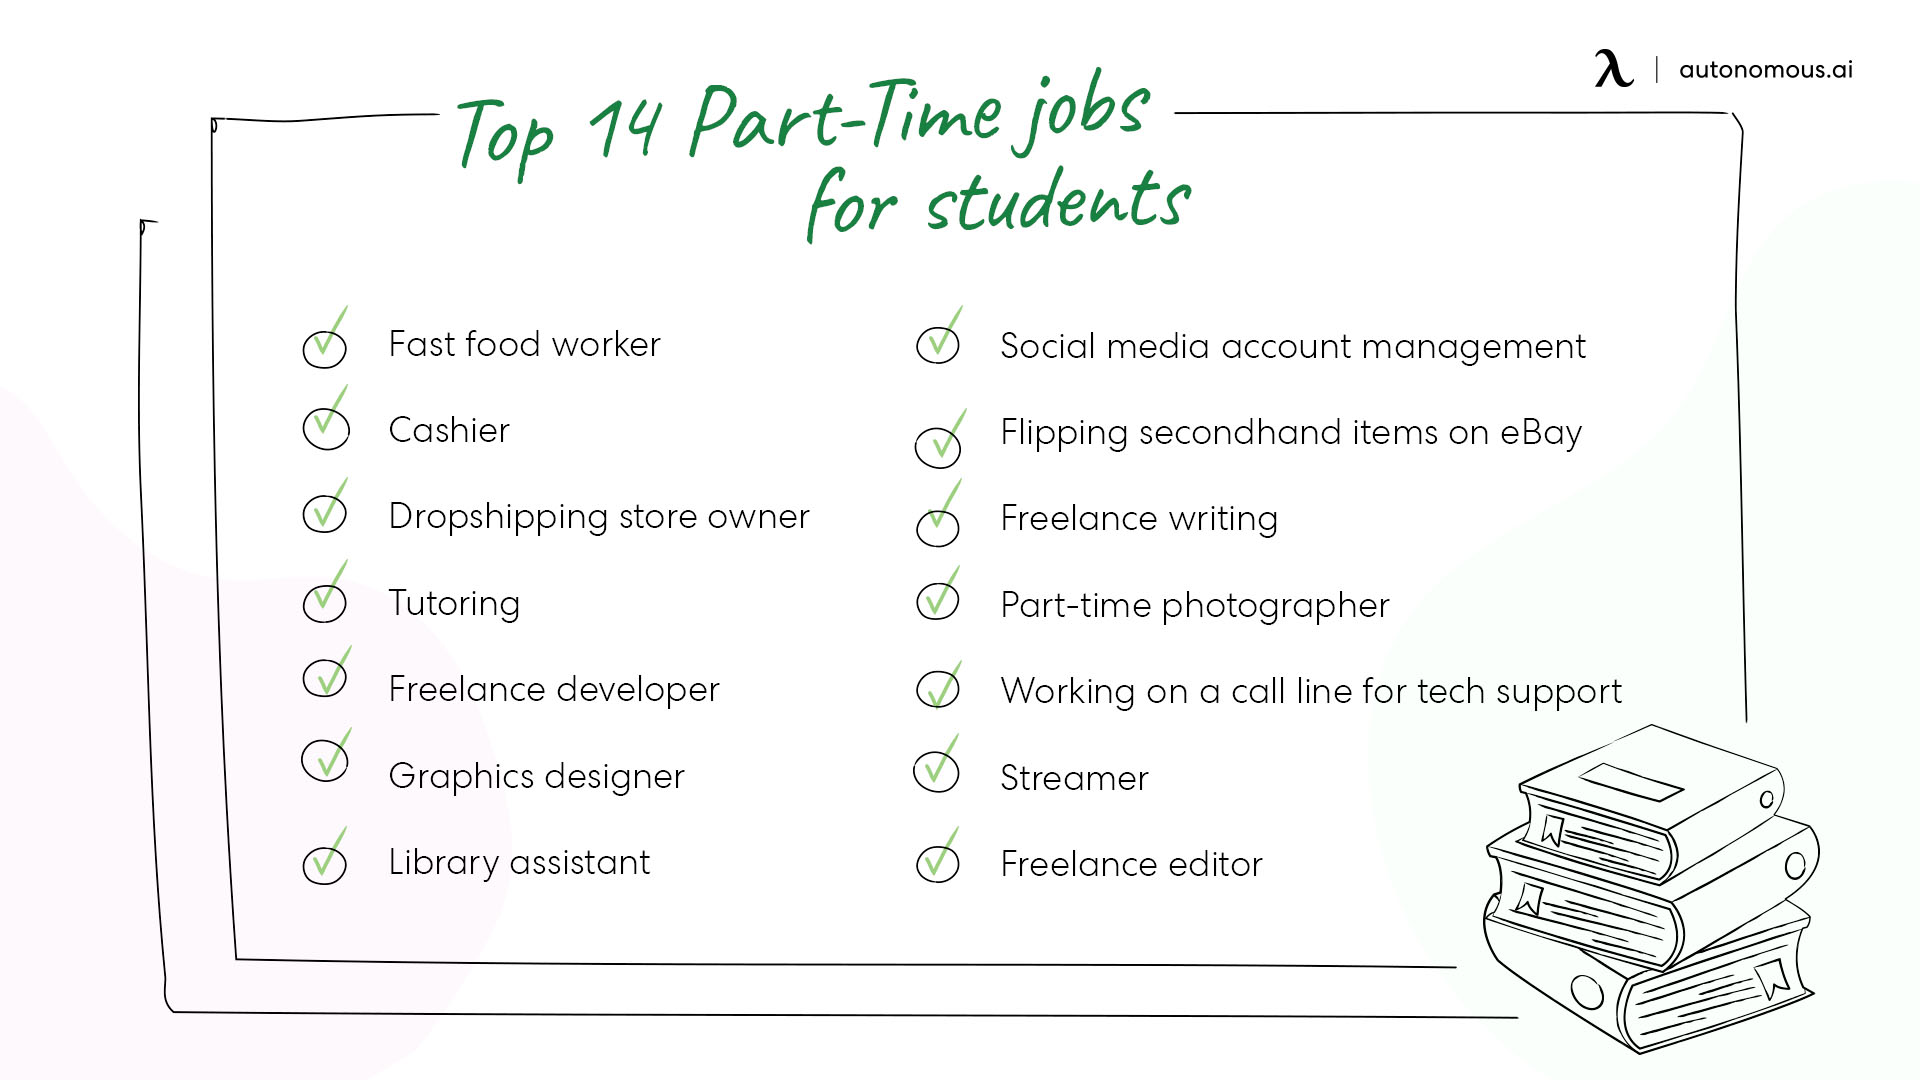 Part-time jobs for students